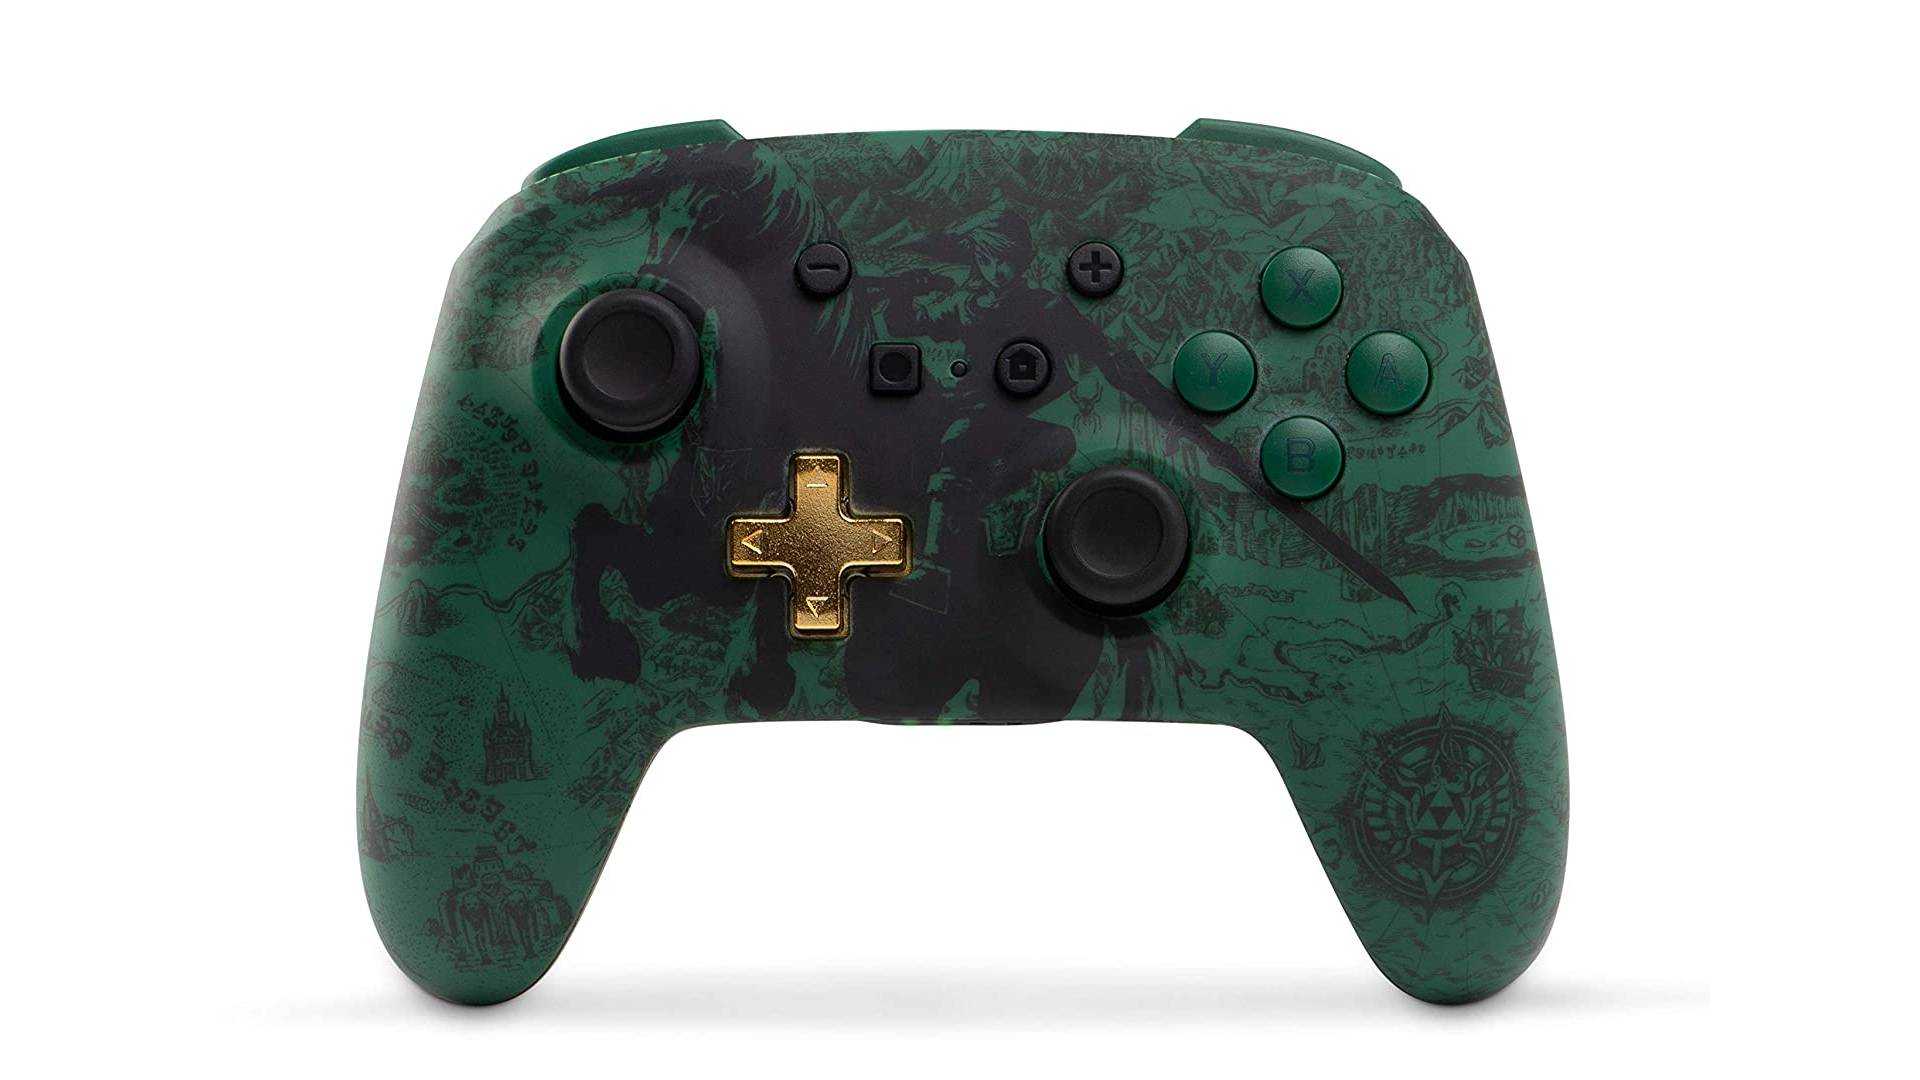 A PowerA wireless controller with The Legend Of Zelda details